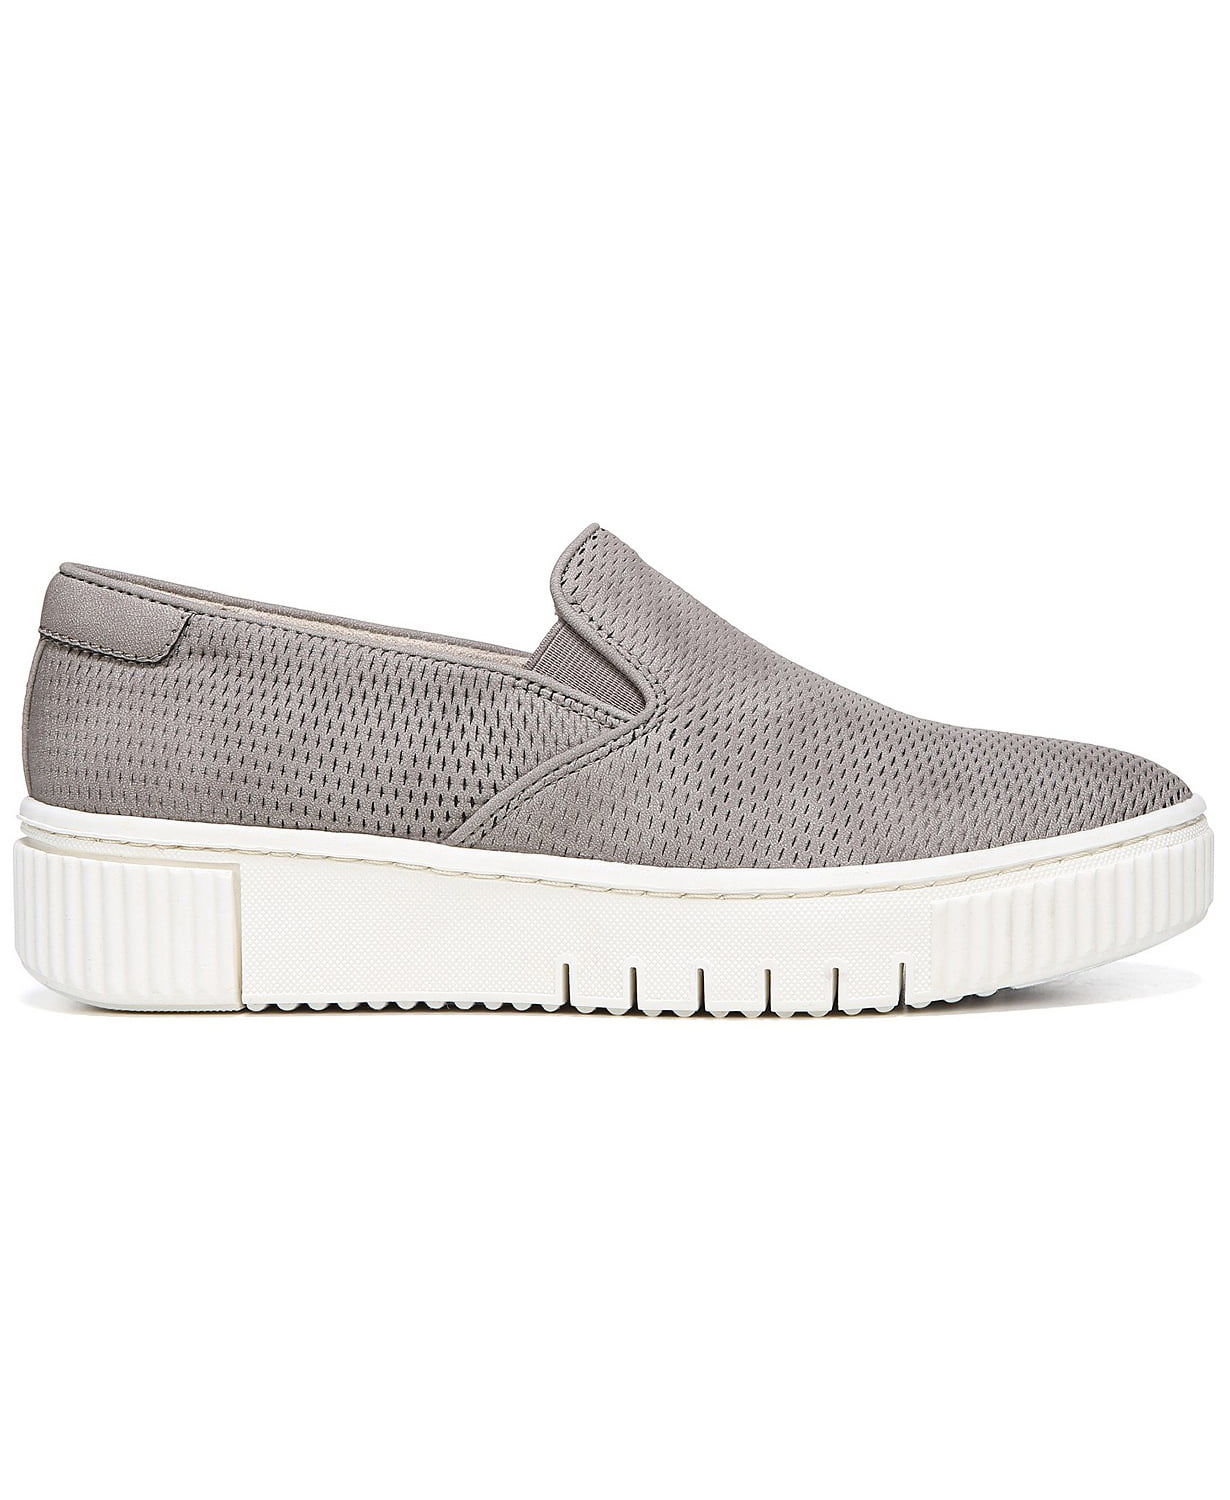 woocommerce-673321-2209615.cloudwaysapps.com-soul-naturalizer-womens-grey-tia-slip-on-low-top-sneakers